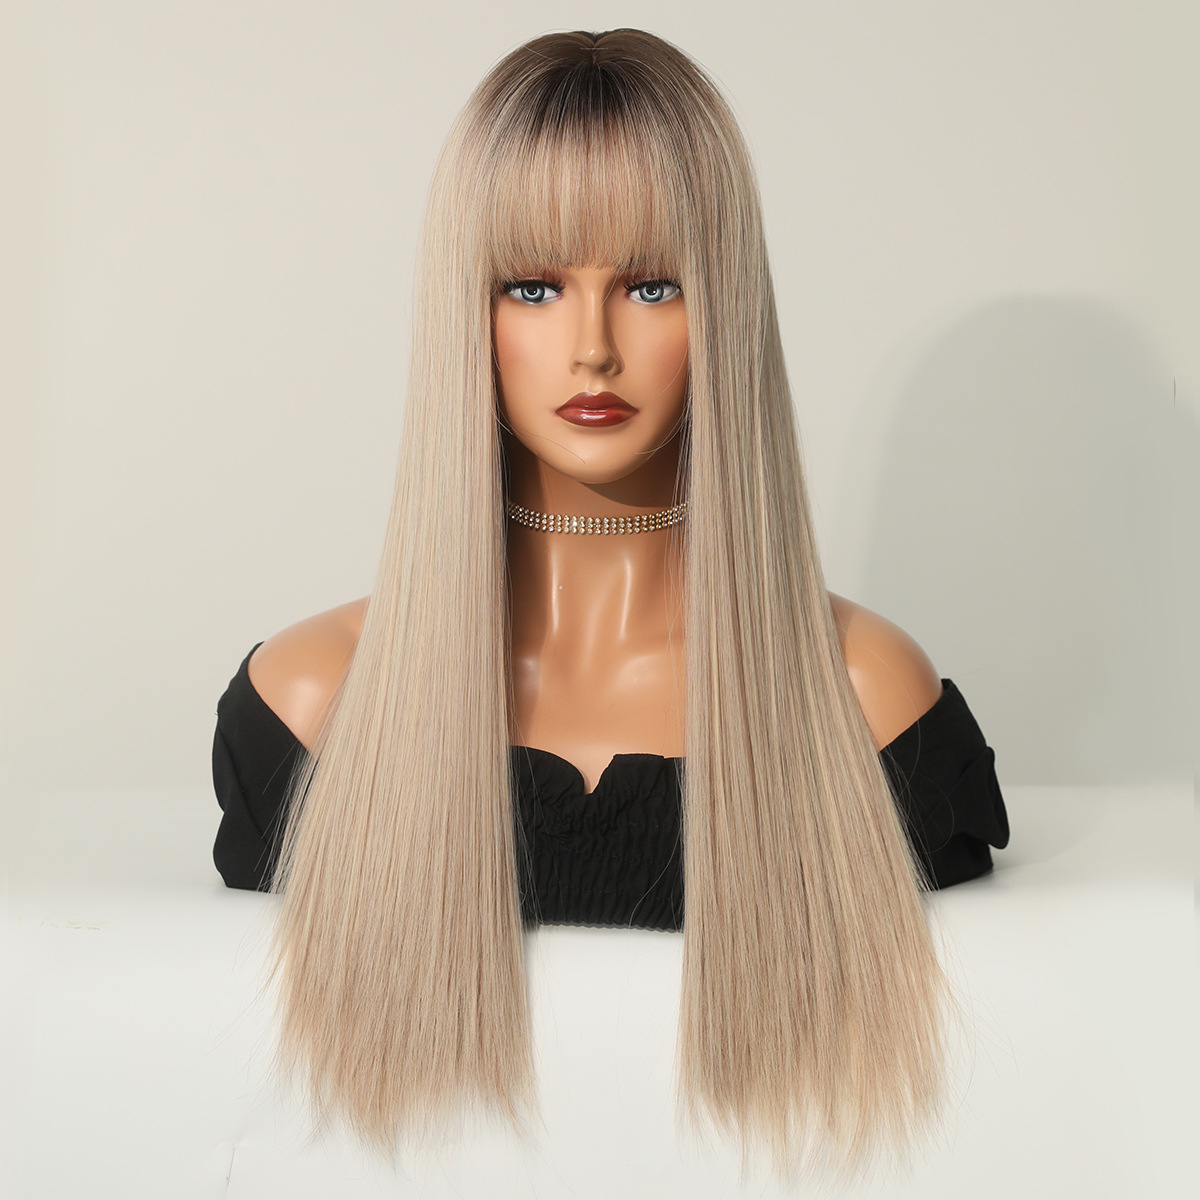 A synthetic wig featuring long straight hair in a champagne blonde color, ready to go for quick styling